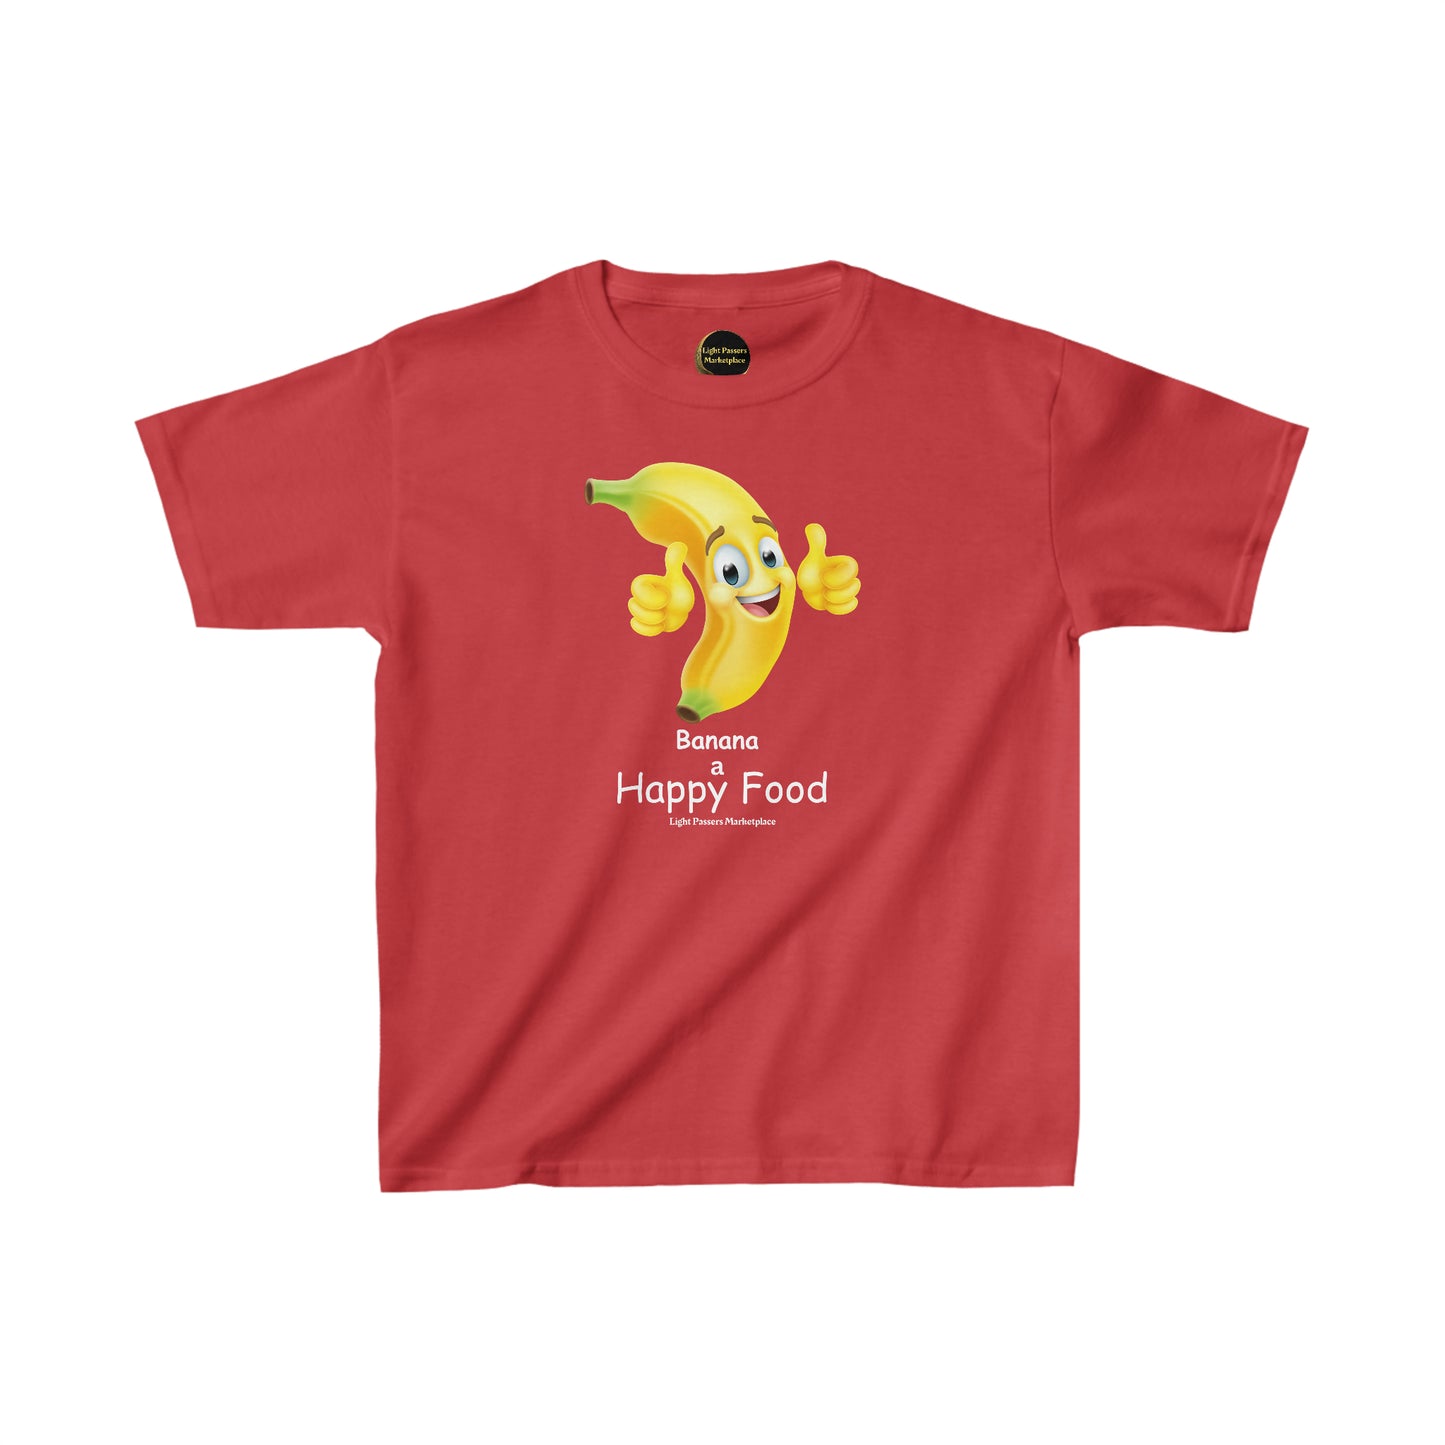 Light Passers Marketplace Youth Cotton T-shirt Nutrition, Mental Health